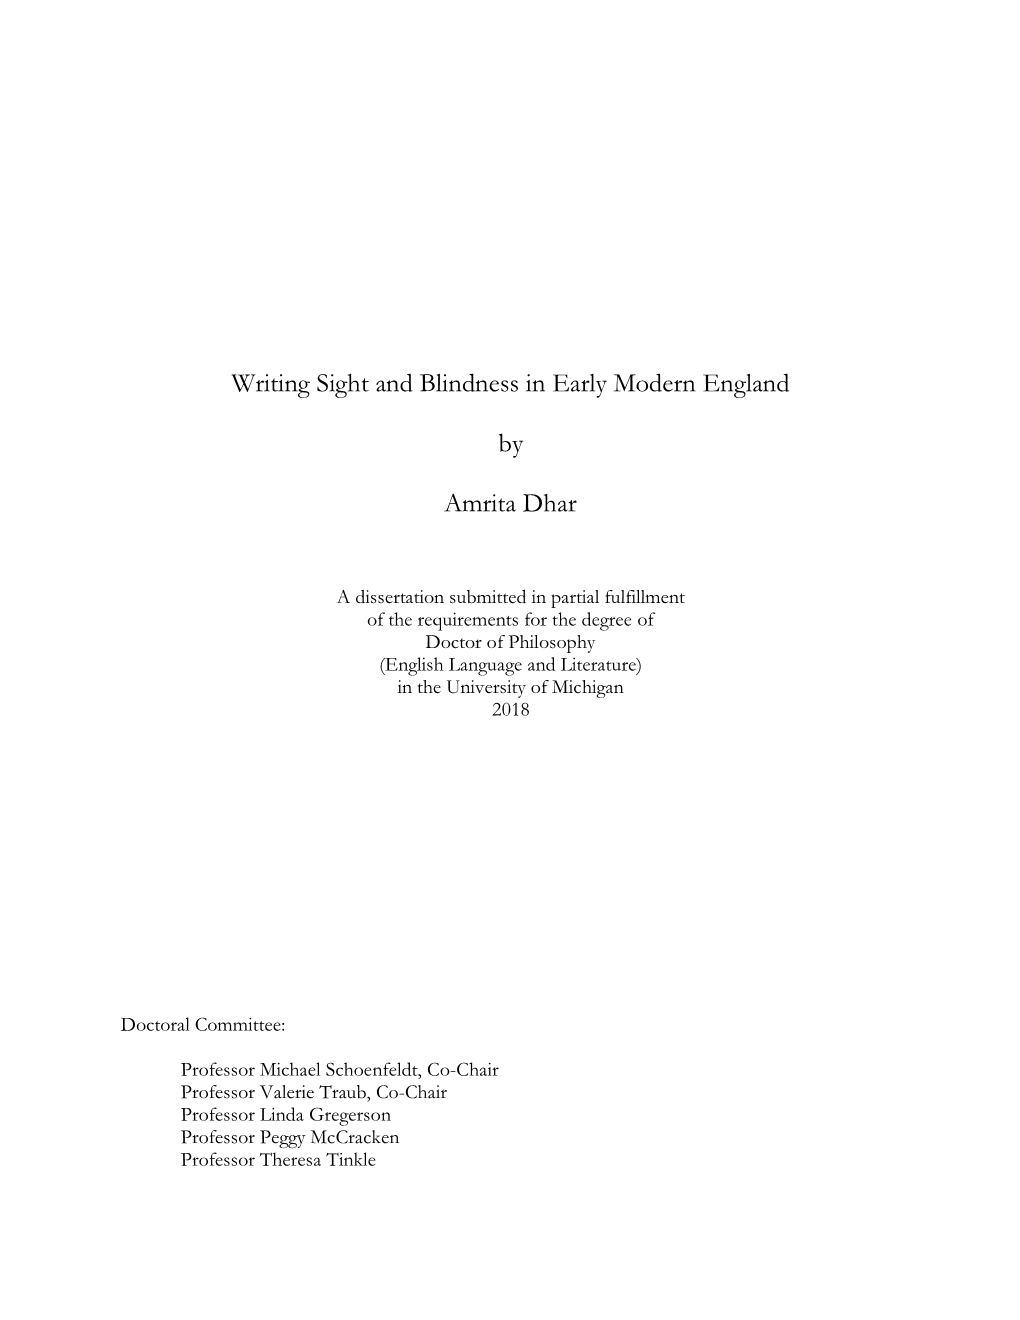 Writing Sight and Blindness in Early Modern England by Amrita Dhar